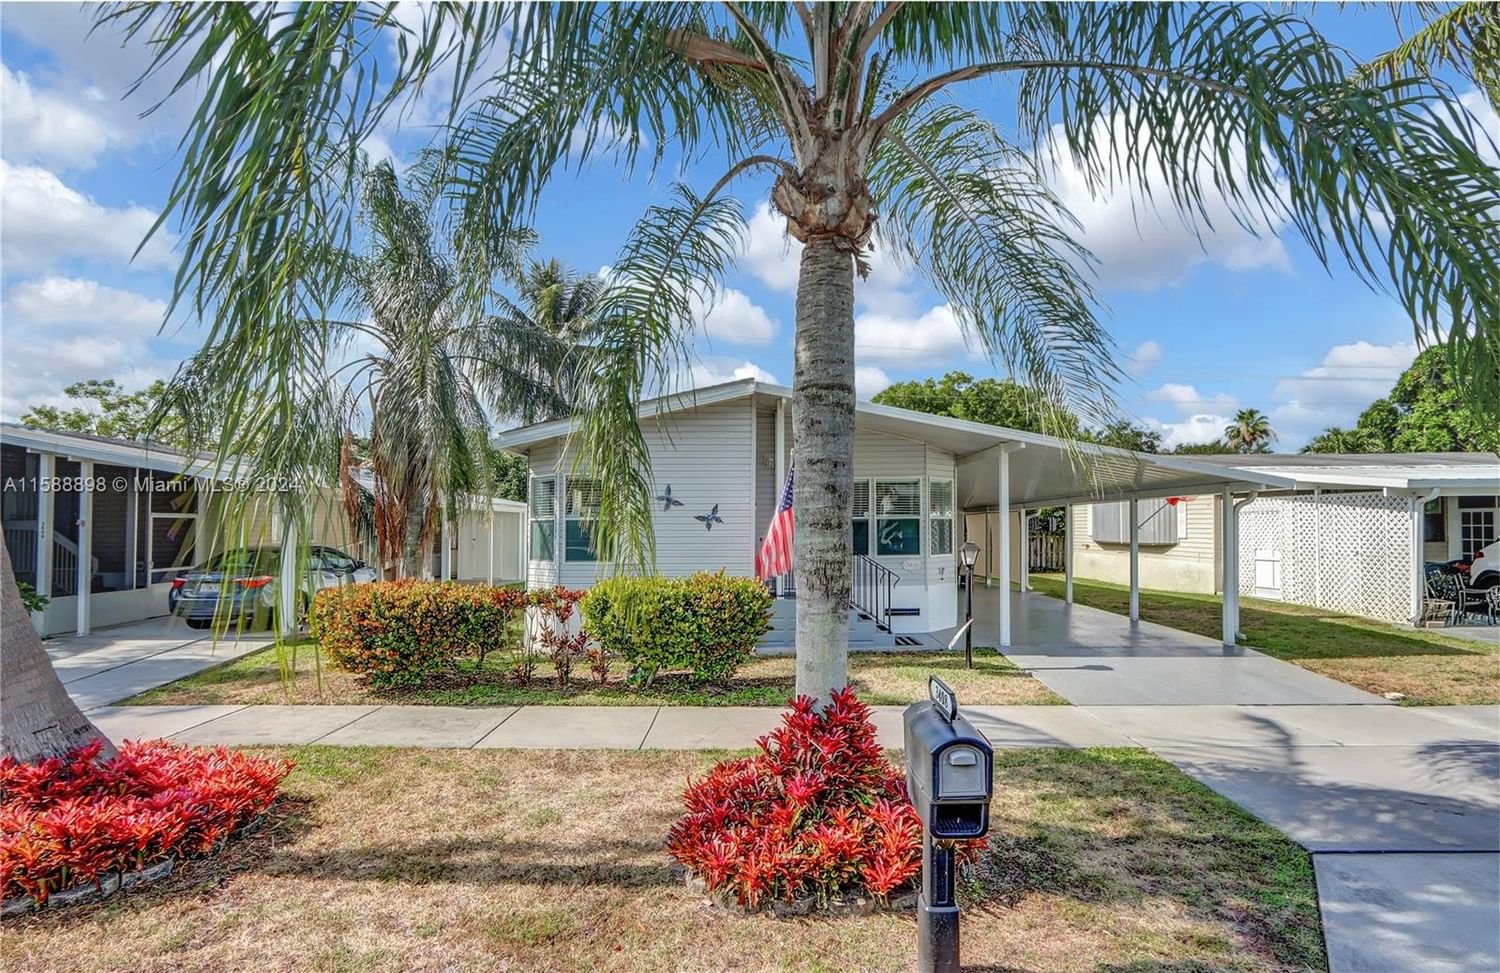 Real estate property located at 3408 64th St, Broward County, Tallowwood Isles, Coconut Creek, FL